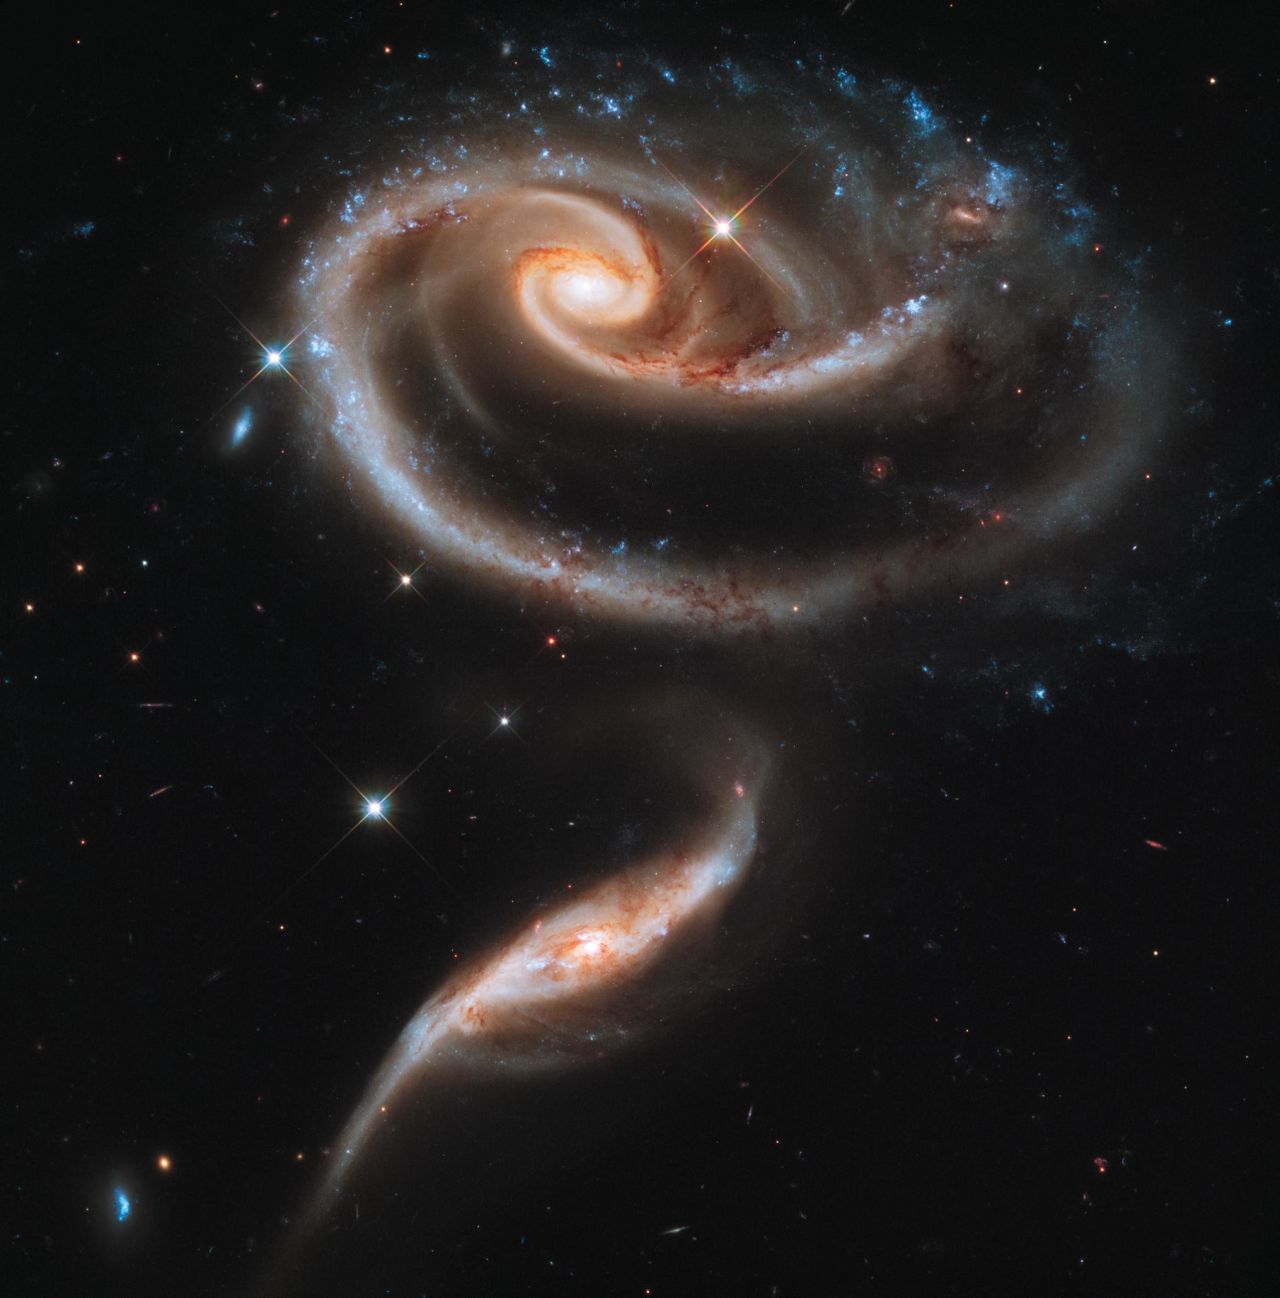 Hubble captured this image of a group of interacting galaxies called Arp 273. The bigger galaxy has a center disk that is distorted into a rose-like shape by the pull from its partner below.